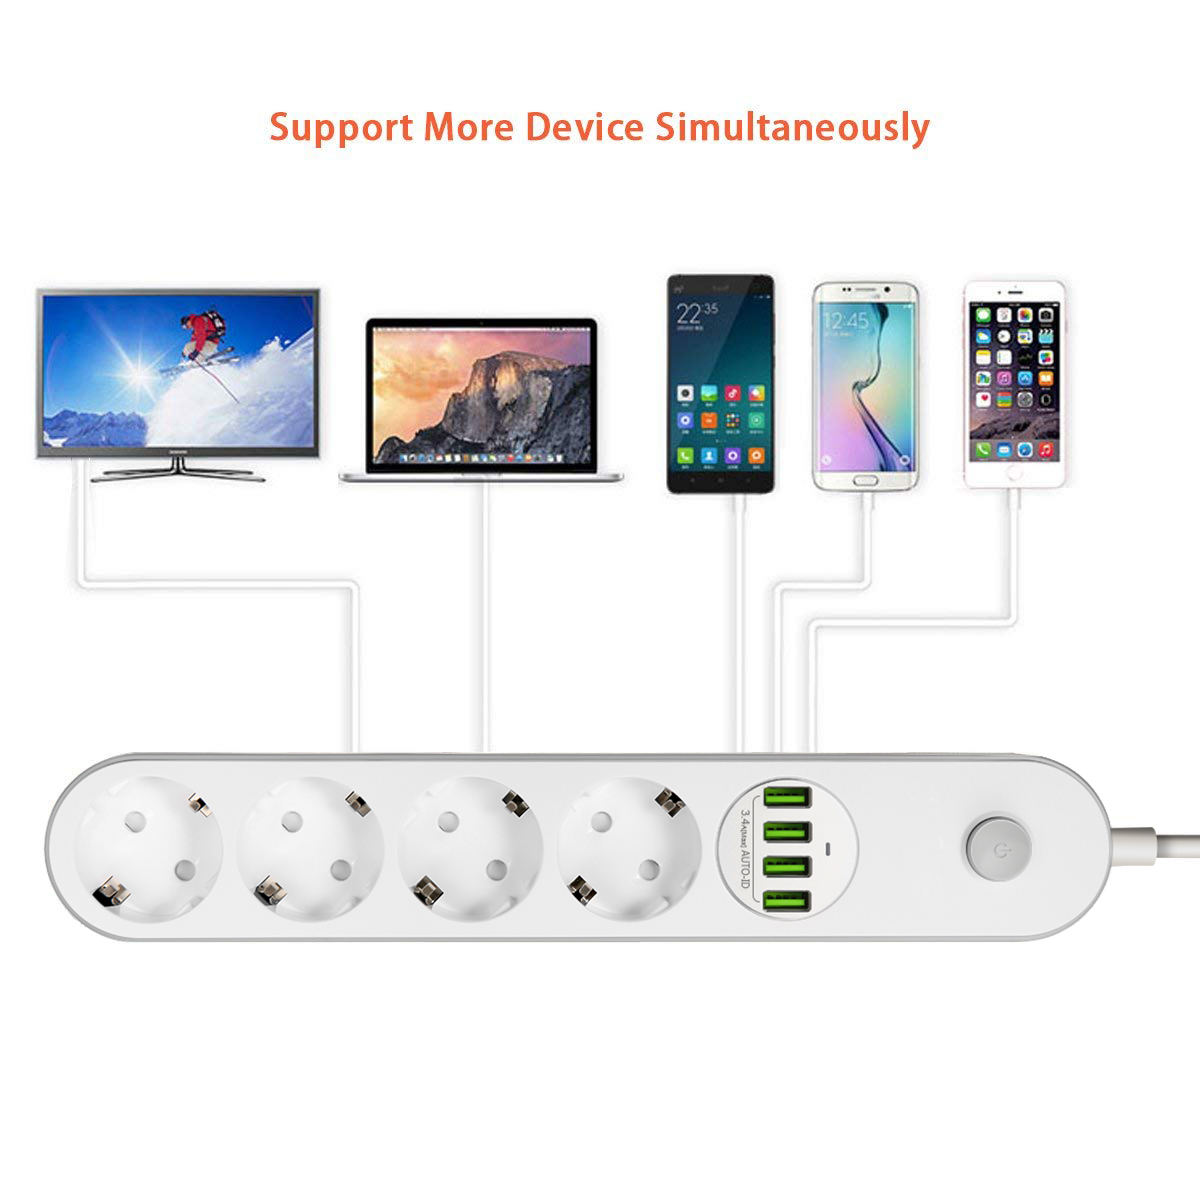 LDNIO-SE4432-Extension-Cord-Socket-Charger-With-4-USB-Ports--4-AC-Sockets-EU-Plug-Fast-Charging-For--1135687-4